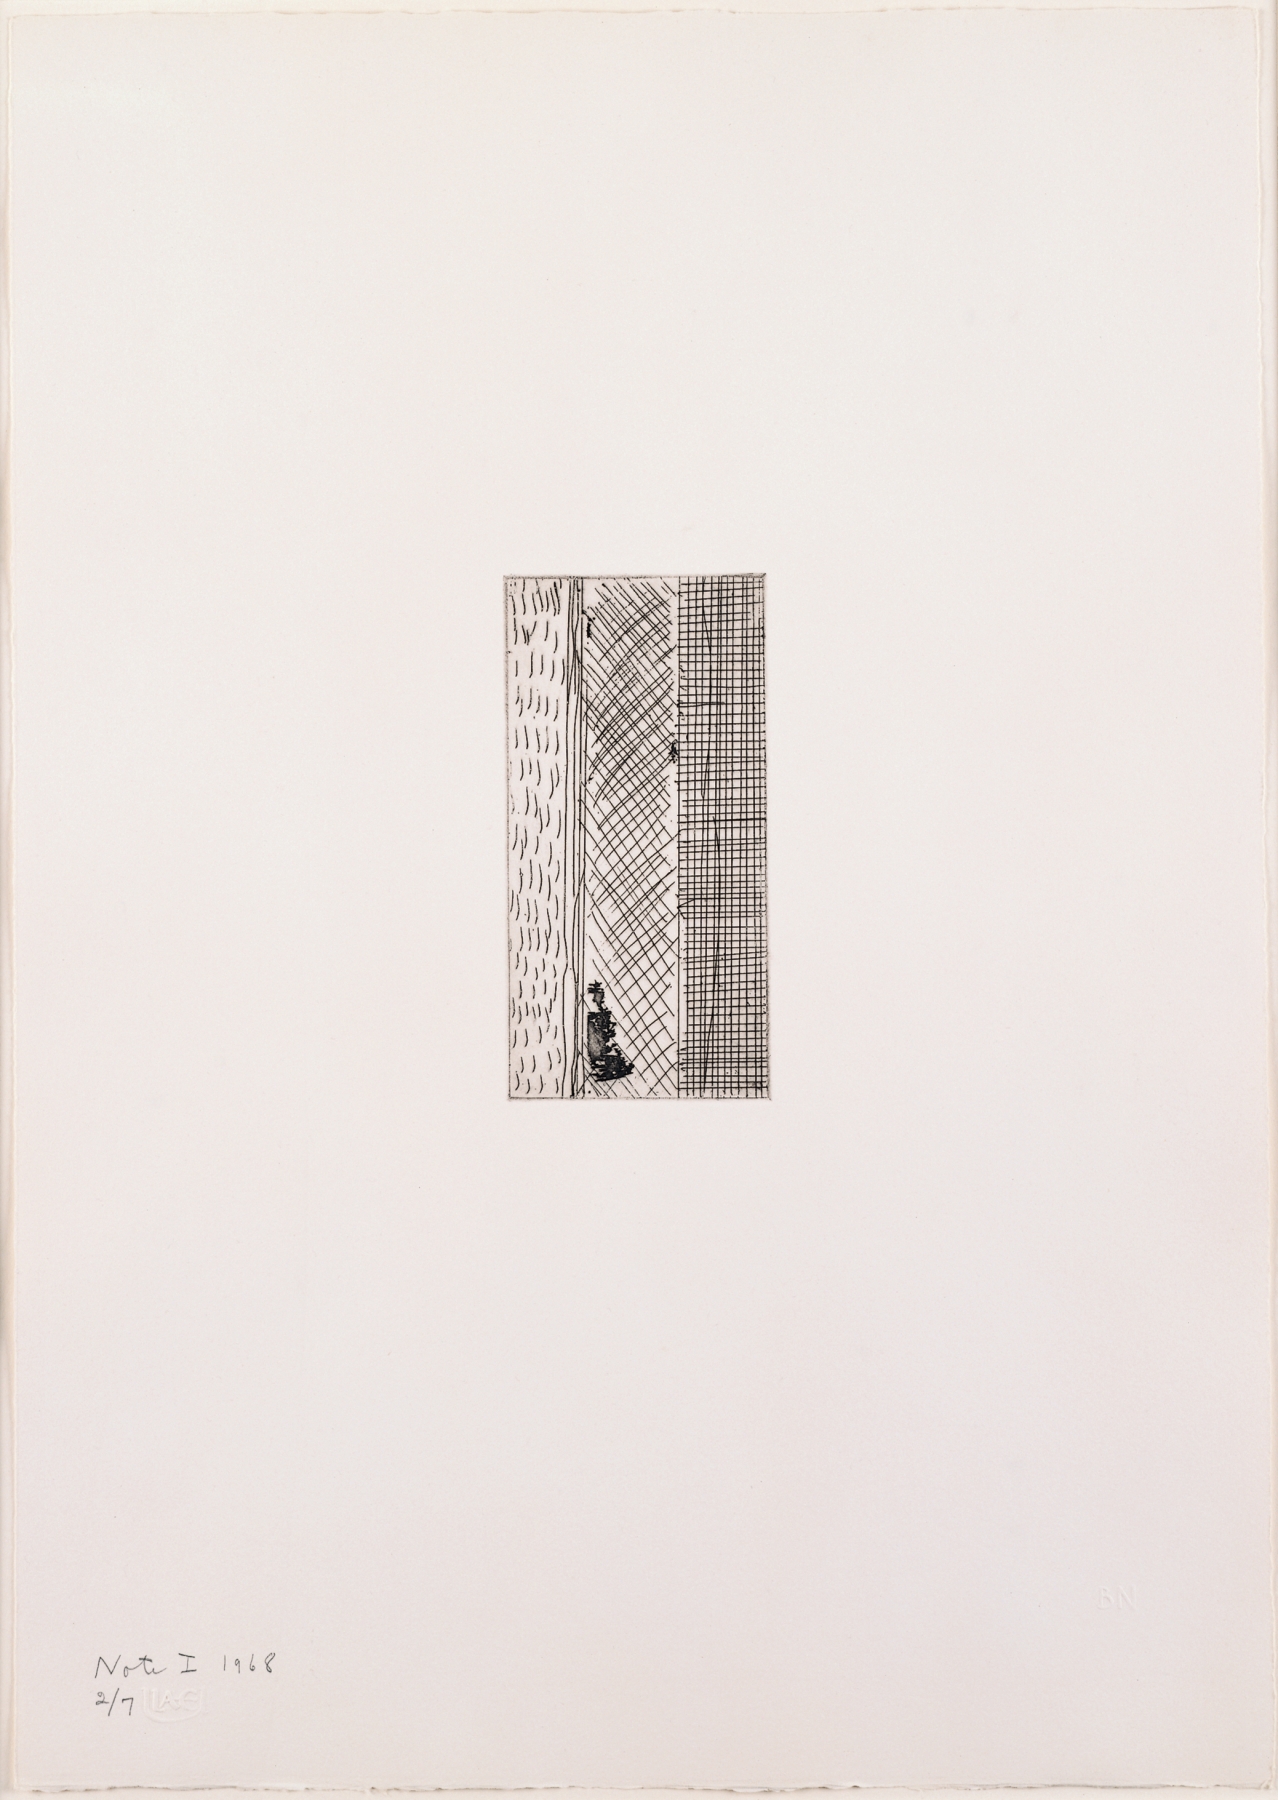 Barnett Newman,&nbsp;Note I, 1968. Etching, printed in black on Italia white wove paper, 5 15/16 x 2 15/16 inches, Plate; 19 7/8 x 14 inches, Sheet. Edition of 7. Private Collection.